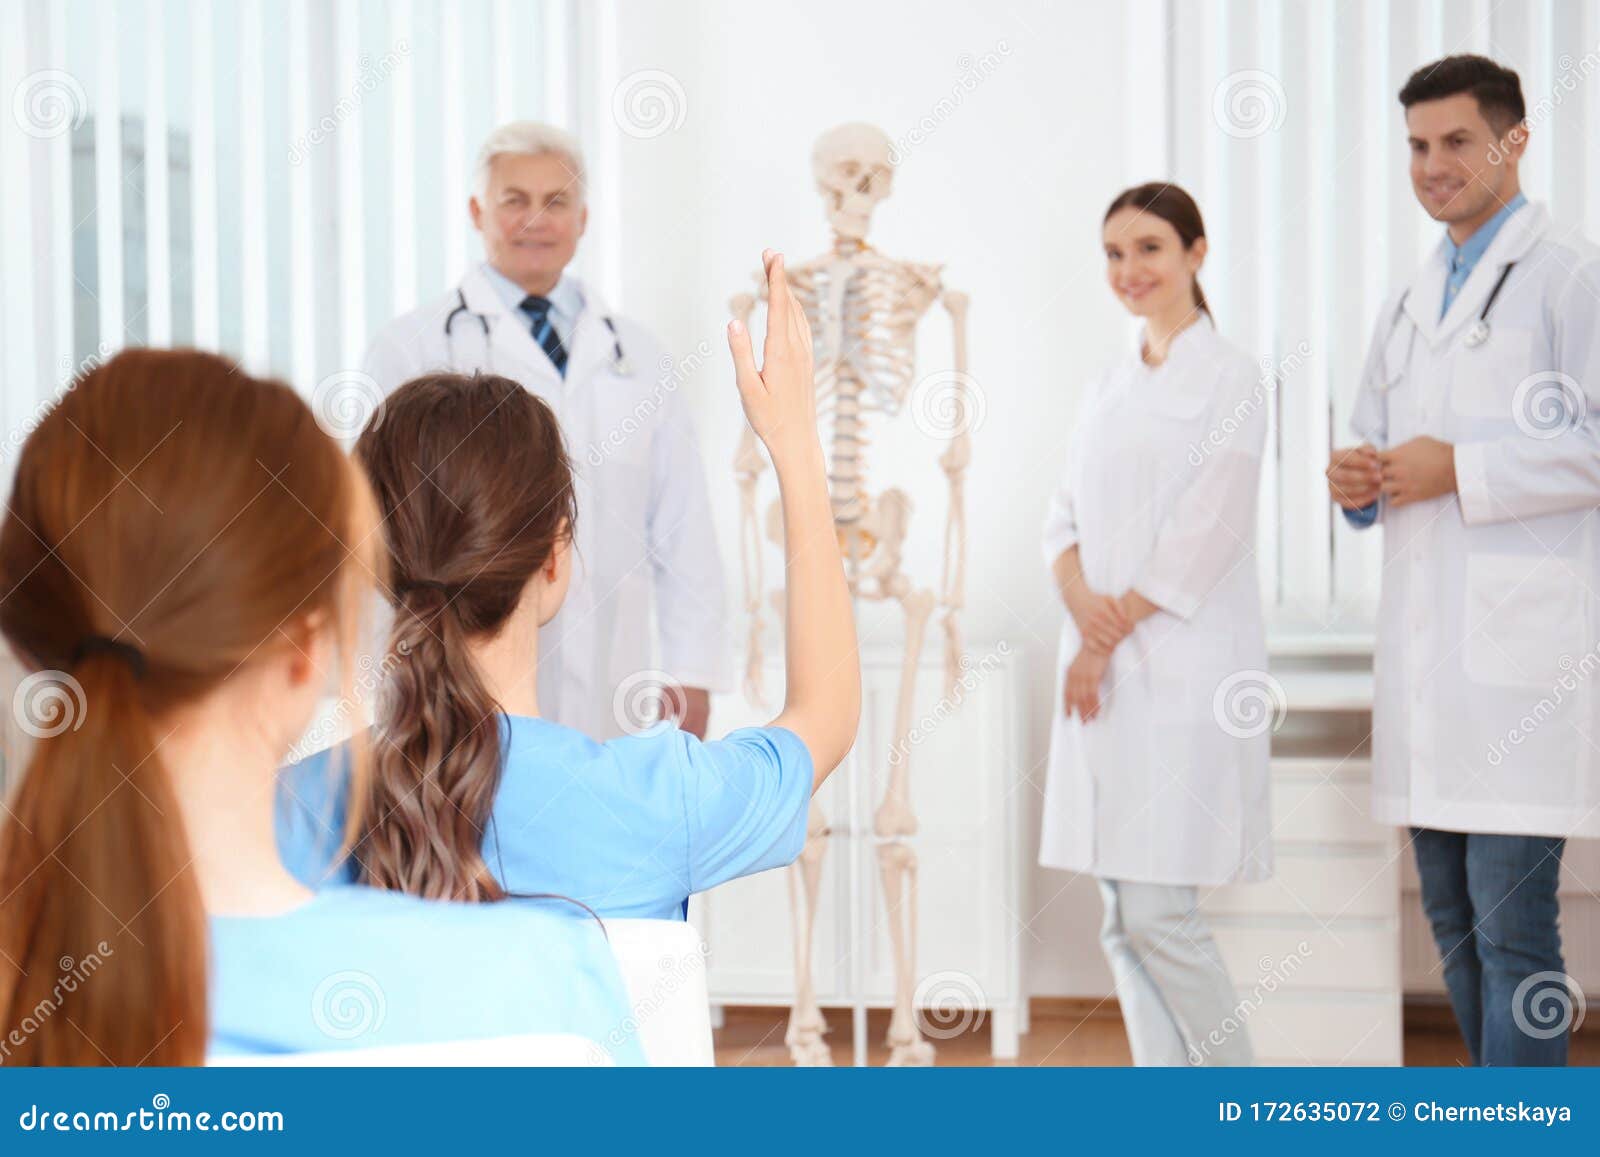 medical students having lecture in orthopedics